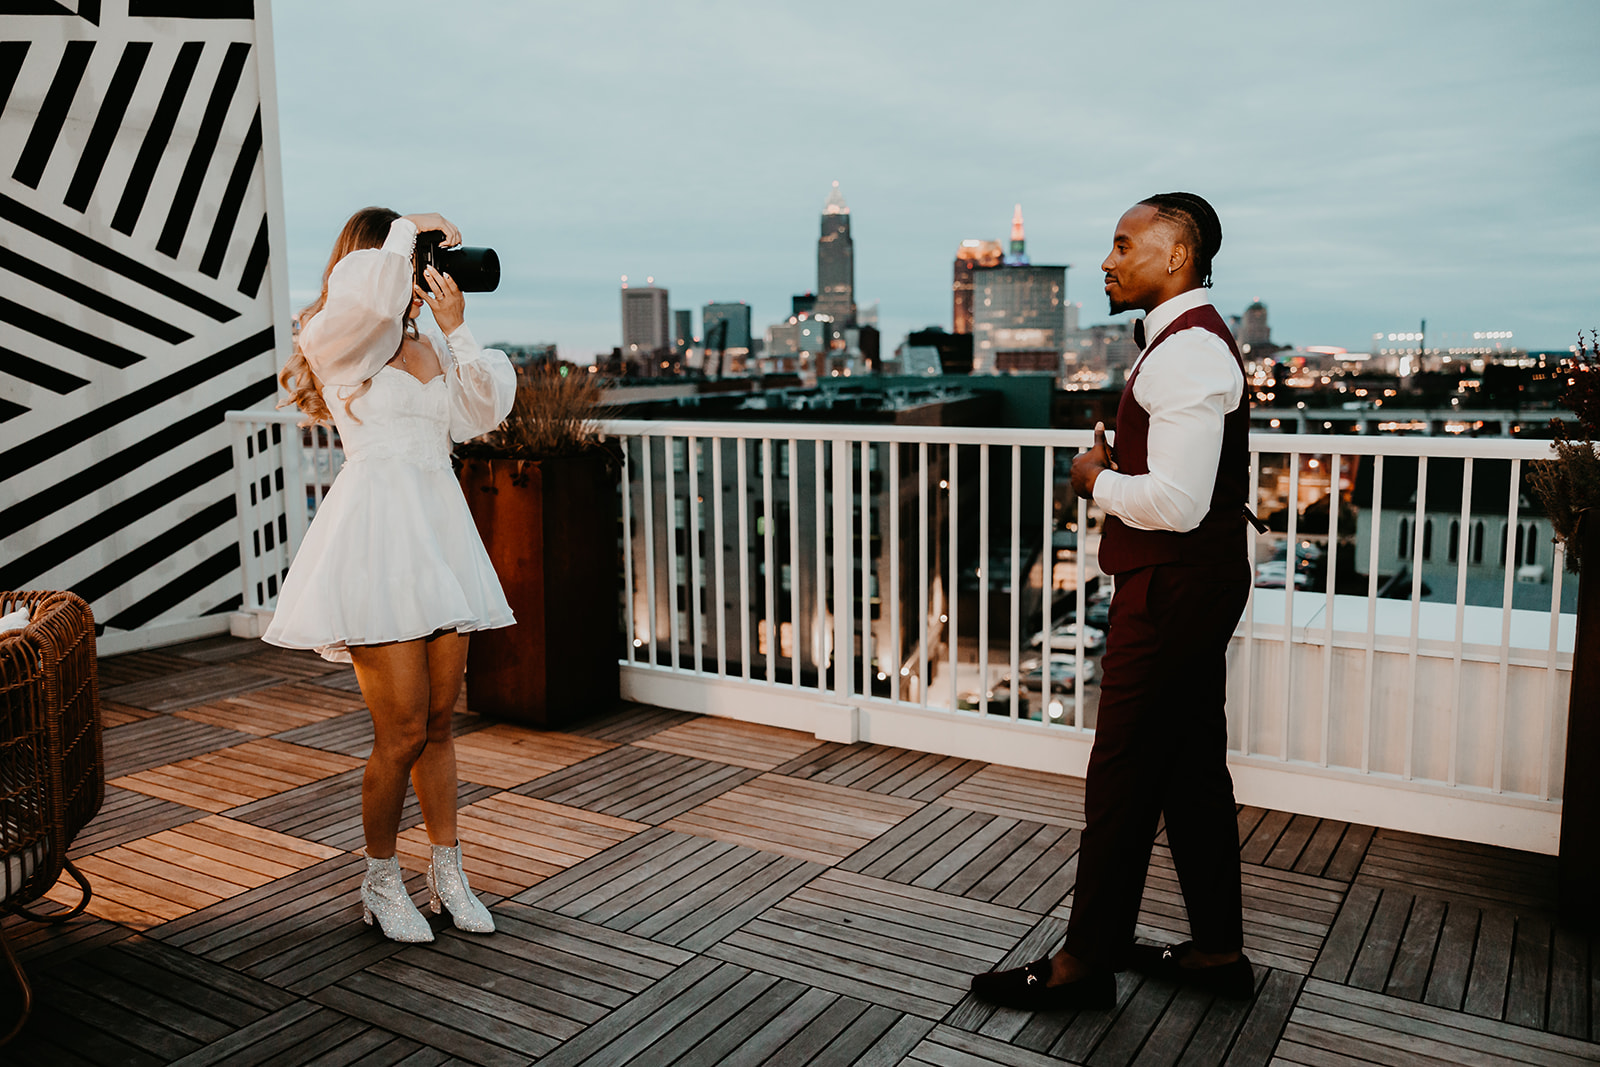 Breathtaking sunset view from the rooftop at The Lantern Room in Cleveland, Ohio - adding a touch of natural beauty to t